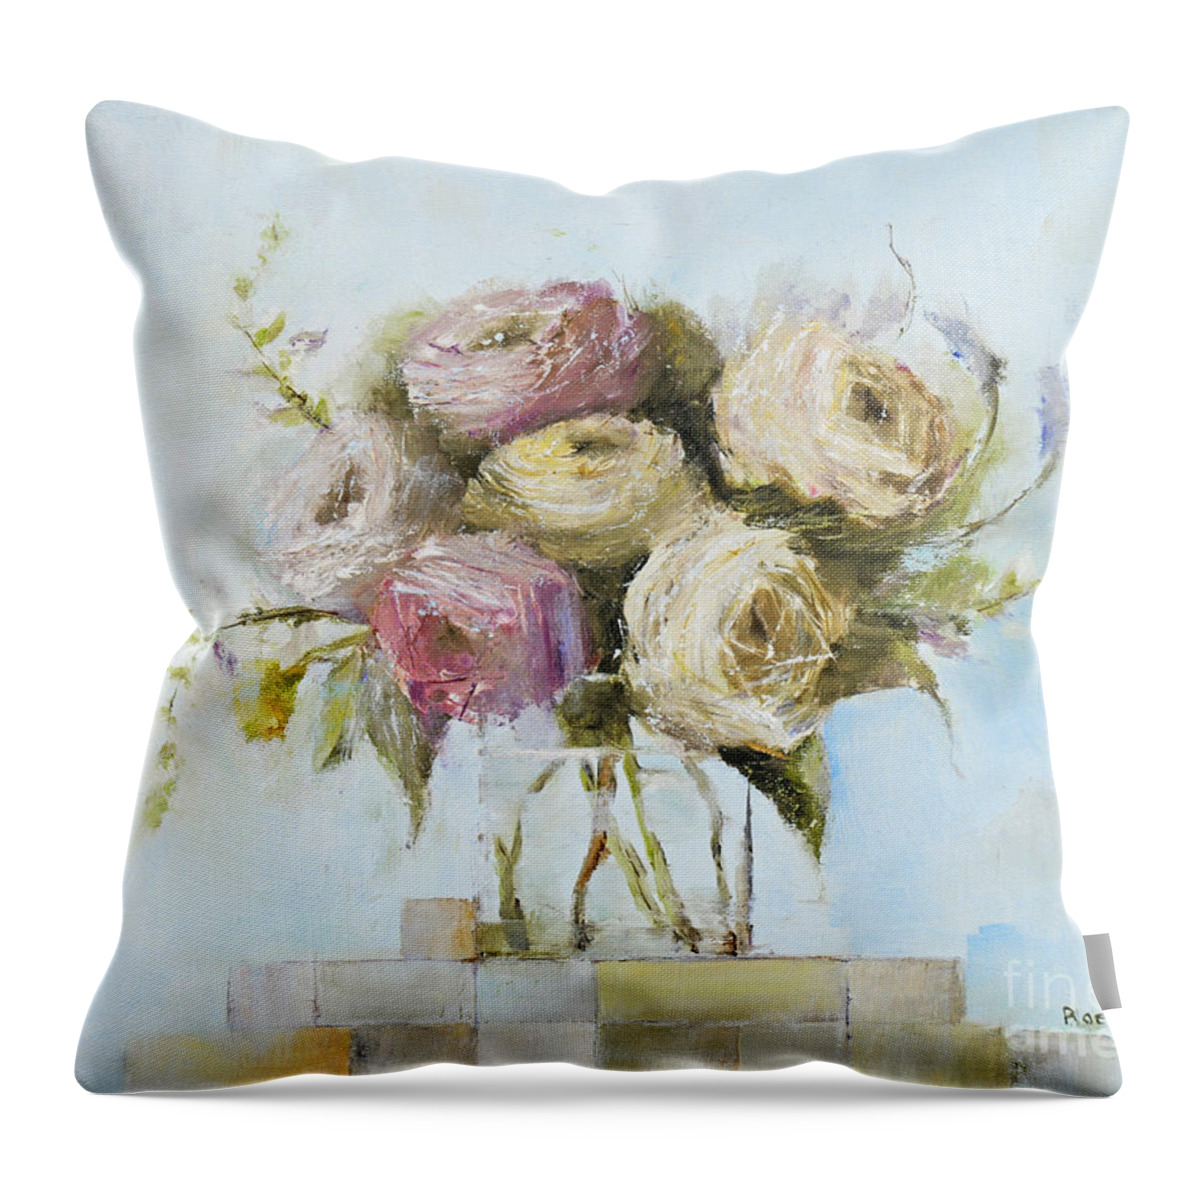 Cadence Throw Pillow featuring the painting Cadence #14 by Paint Box Studio